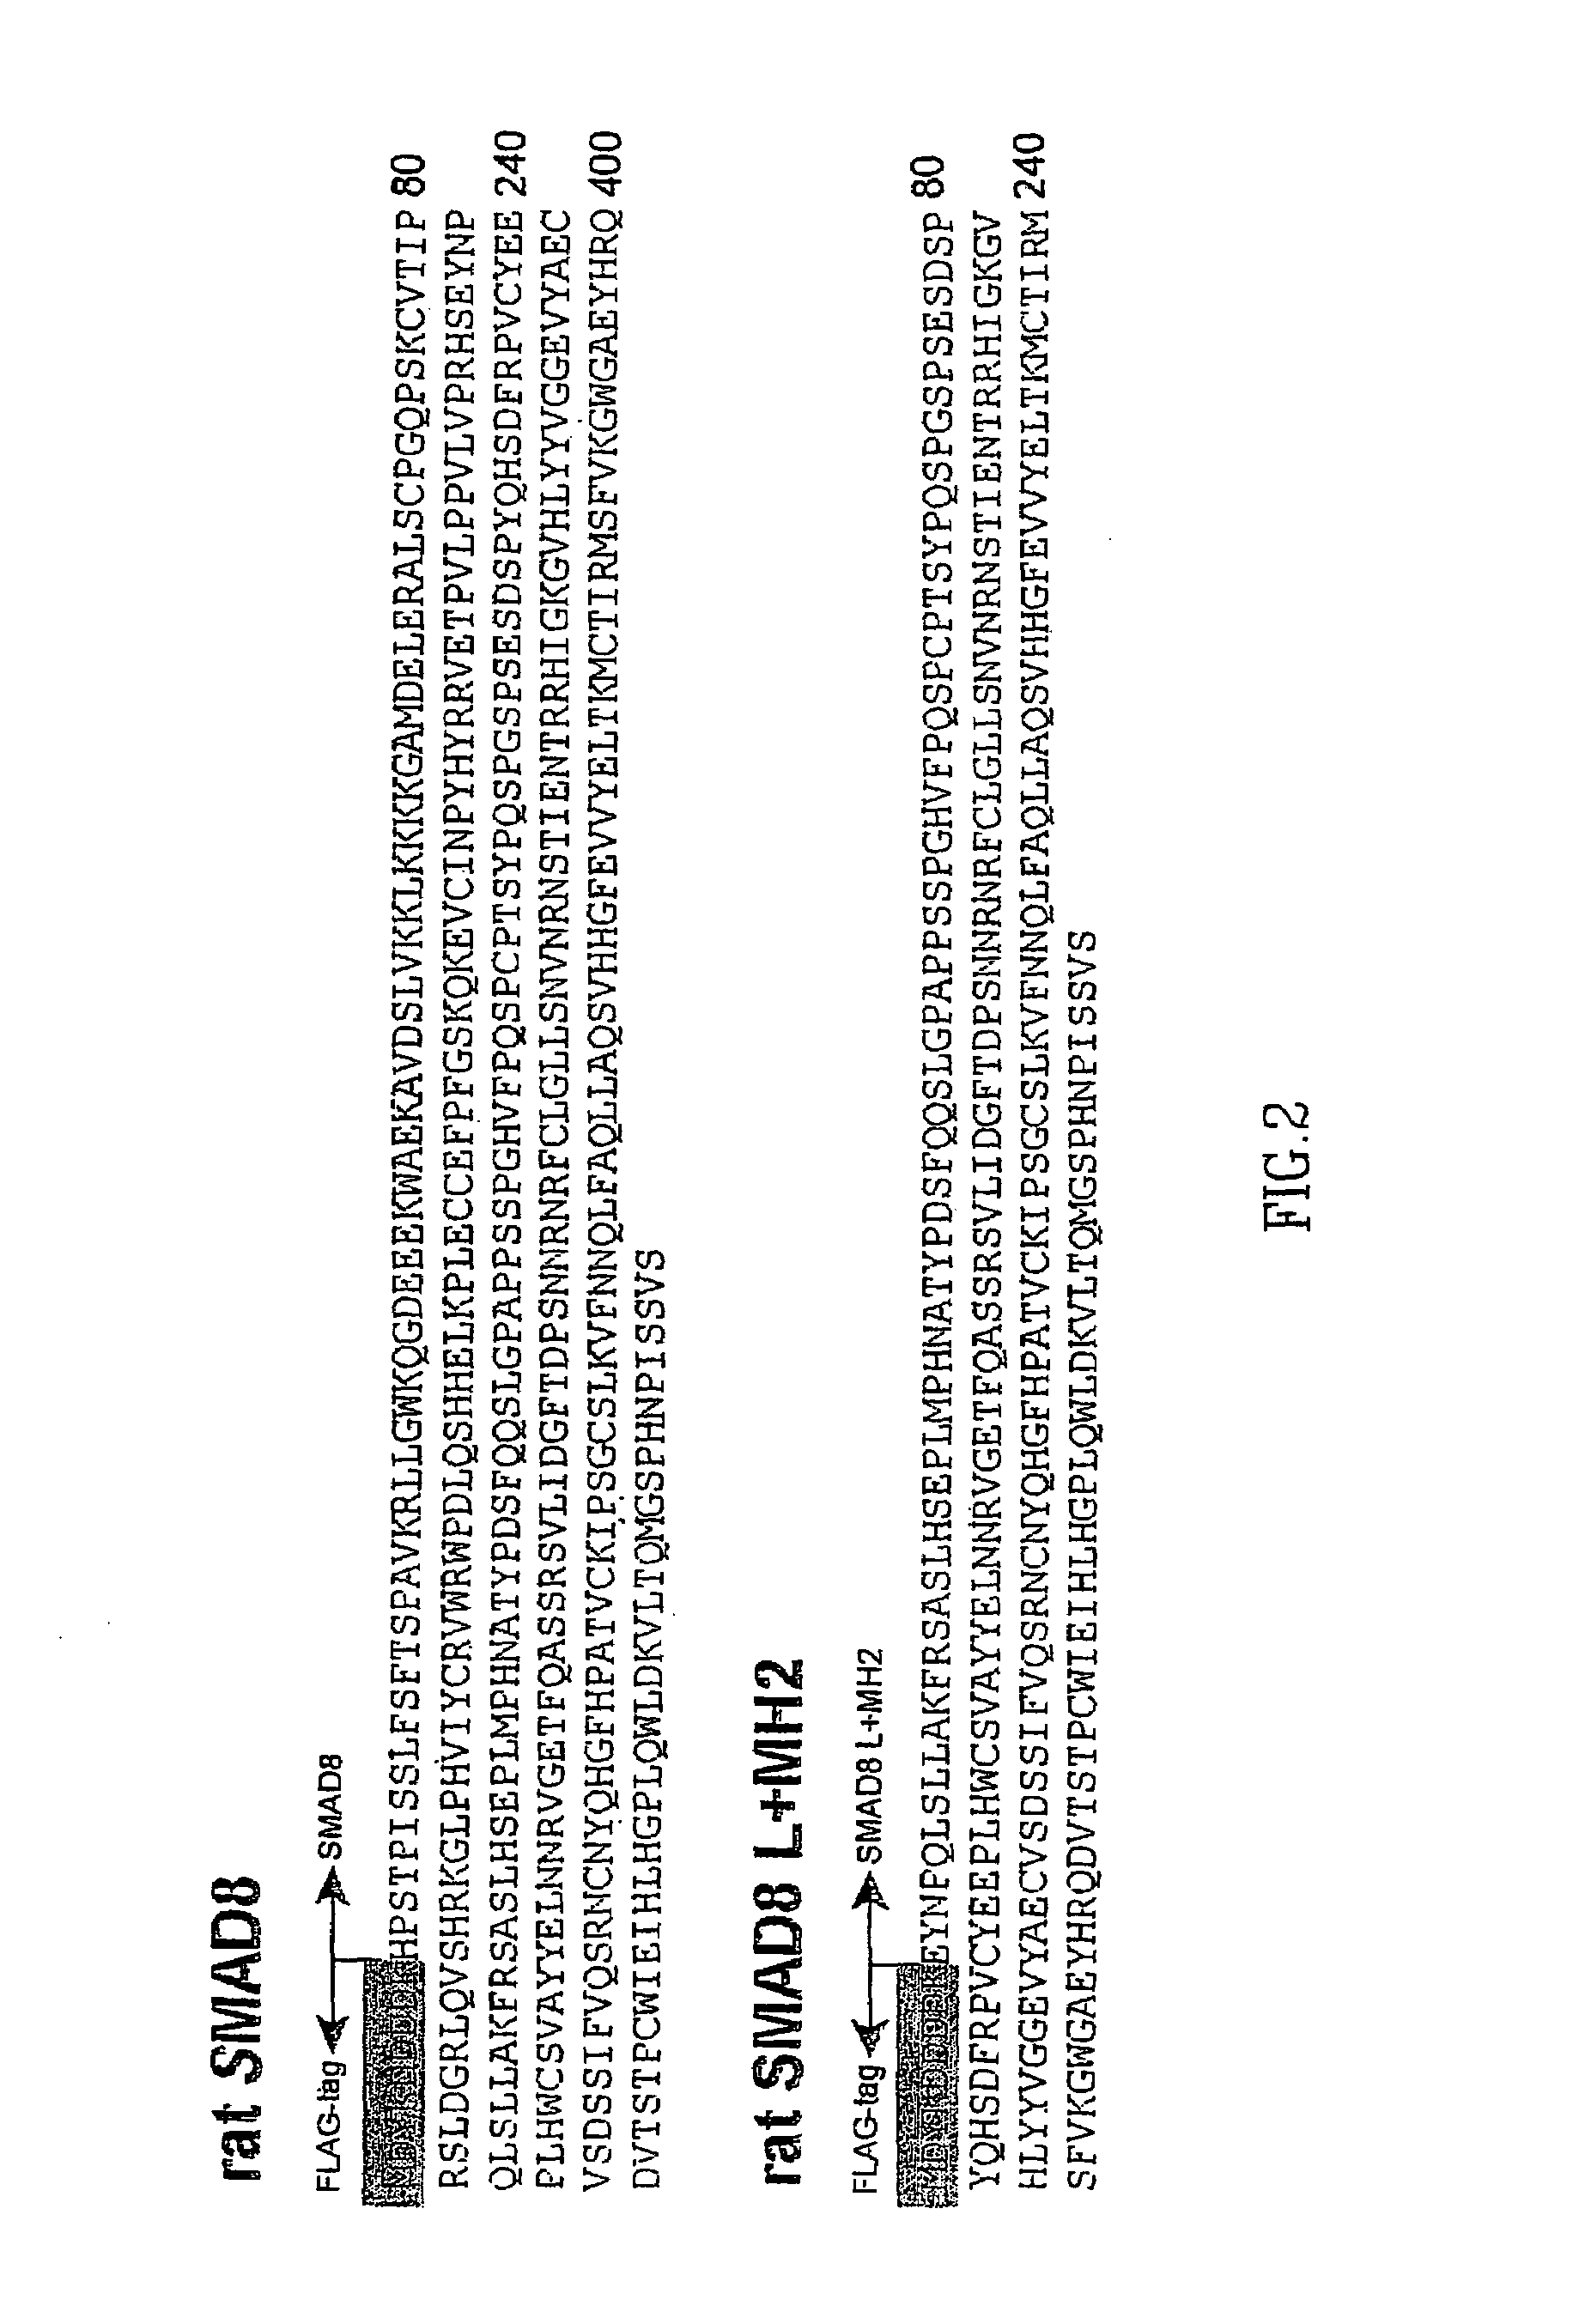 Methods of inducing or enhancing connective tissue repair